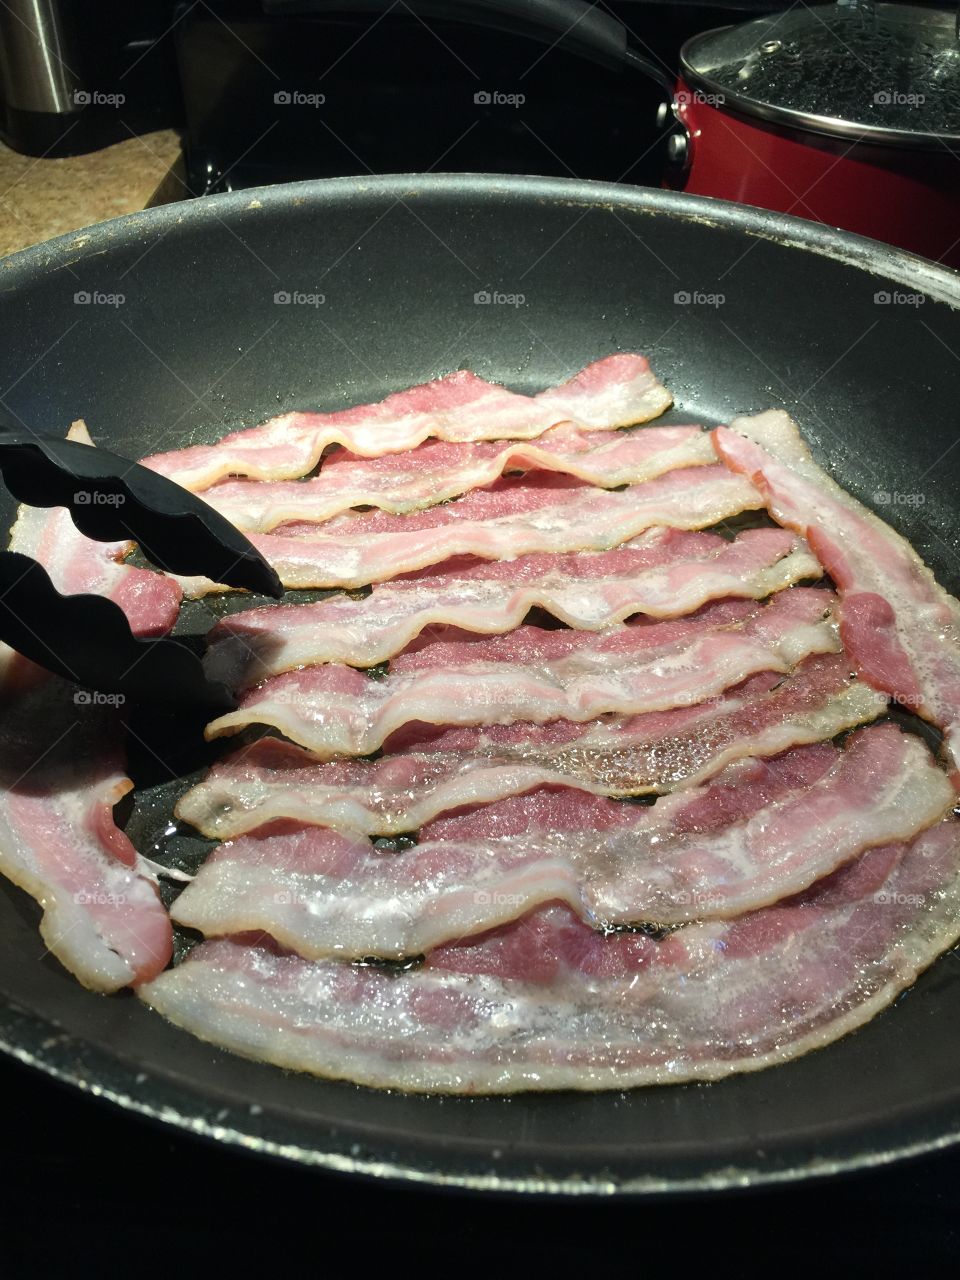 Let's cook some bacon